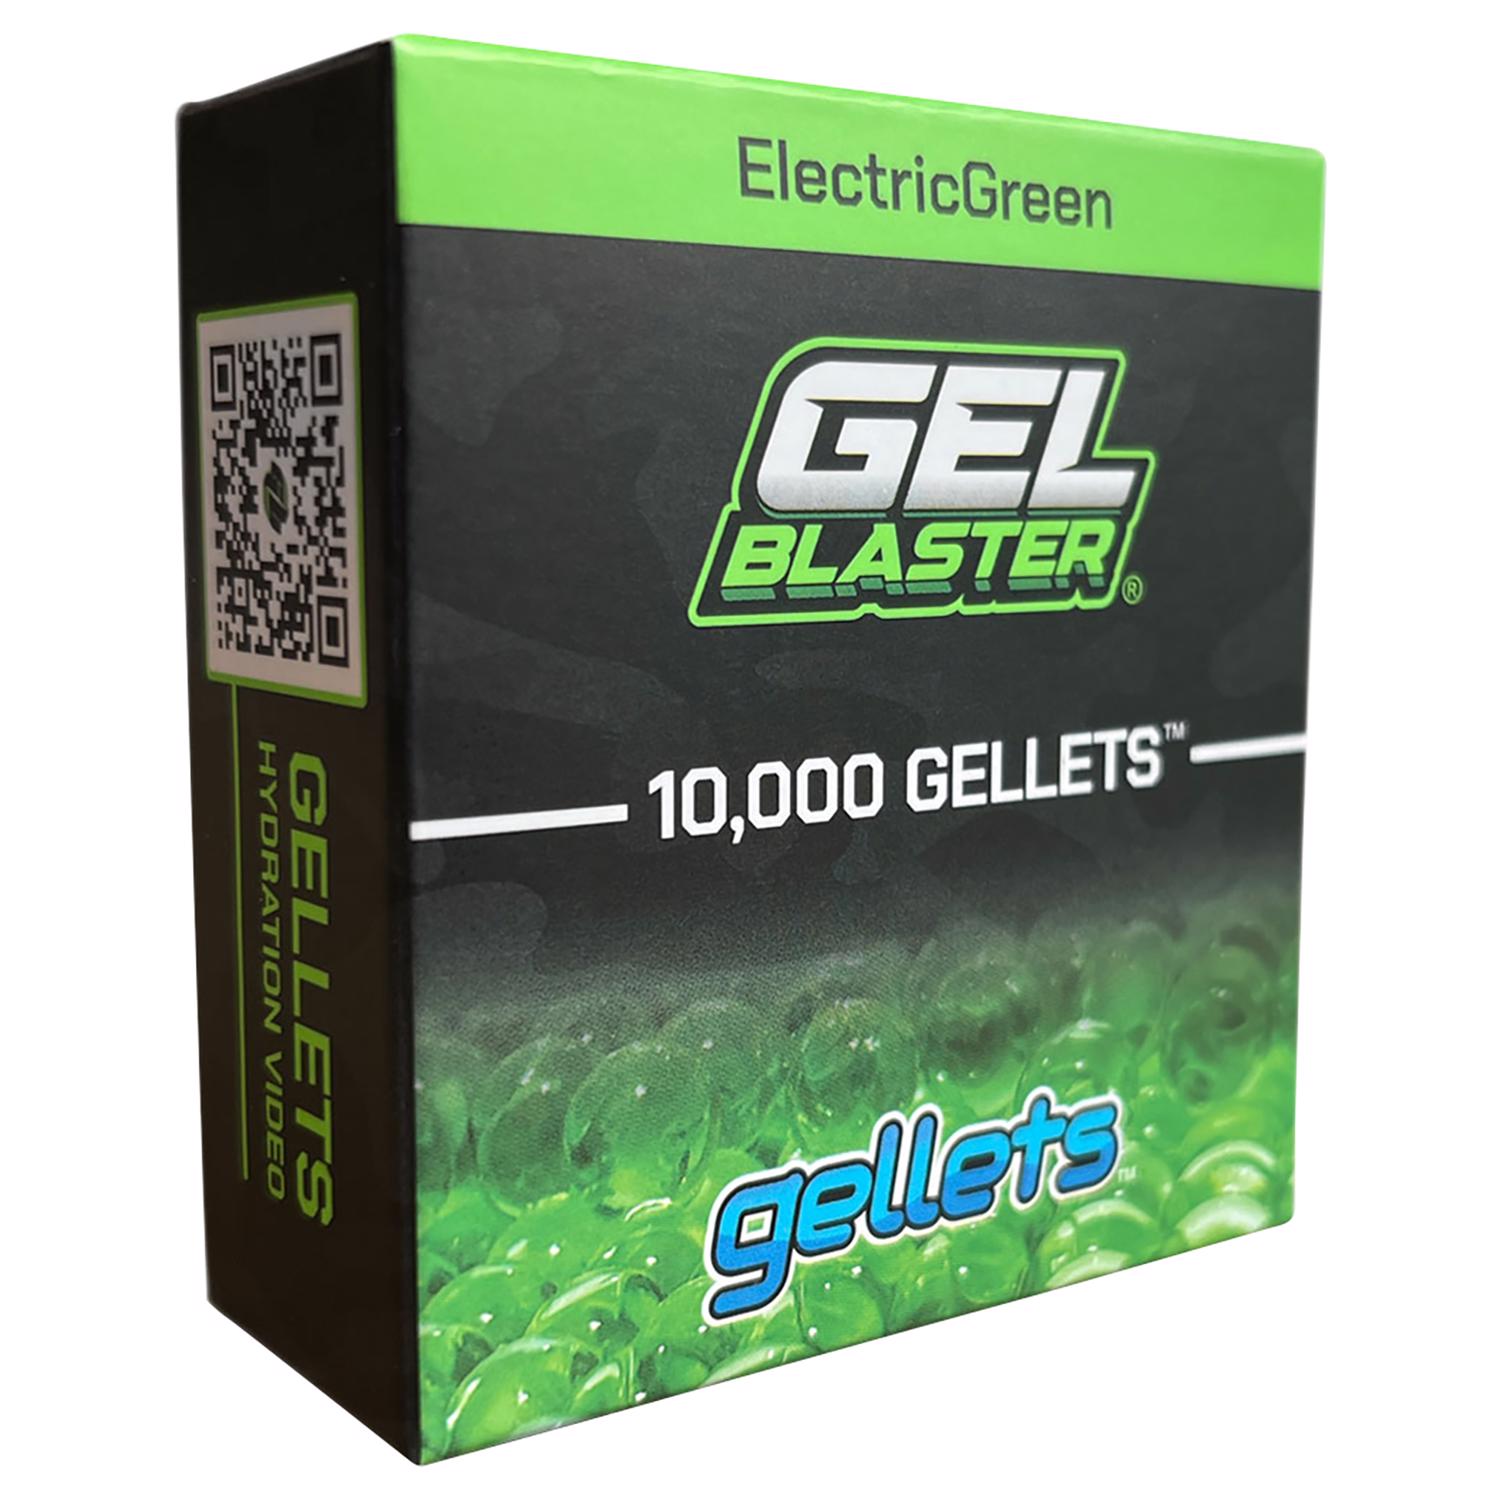 Photos - Other interior and decor ASG Gel Blaster Gellets Electric Green 10000 pc GL4CP09 